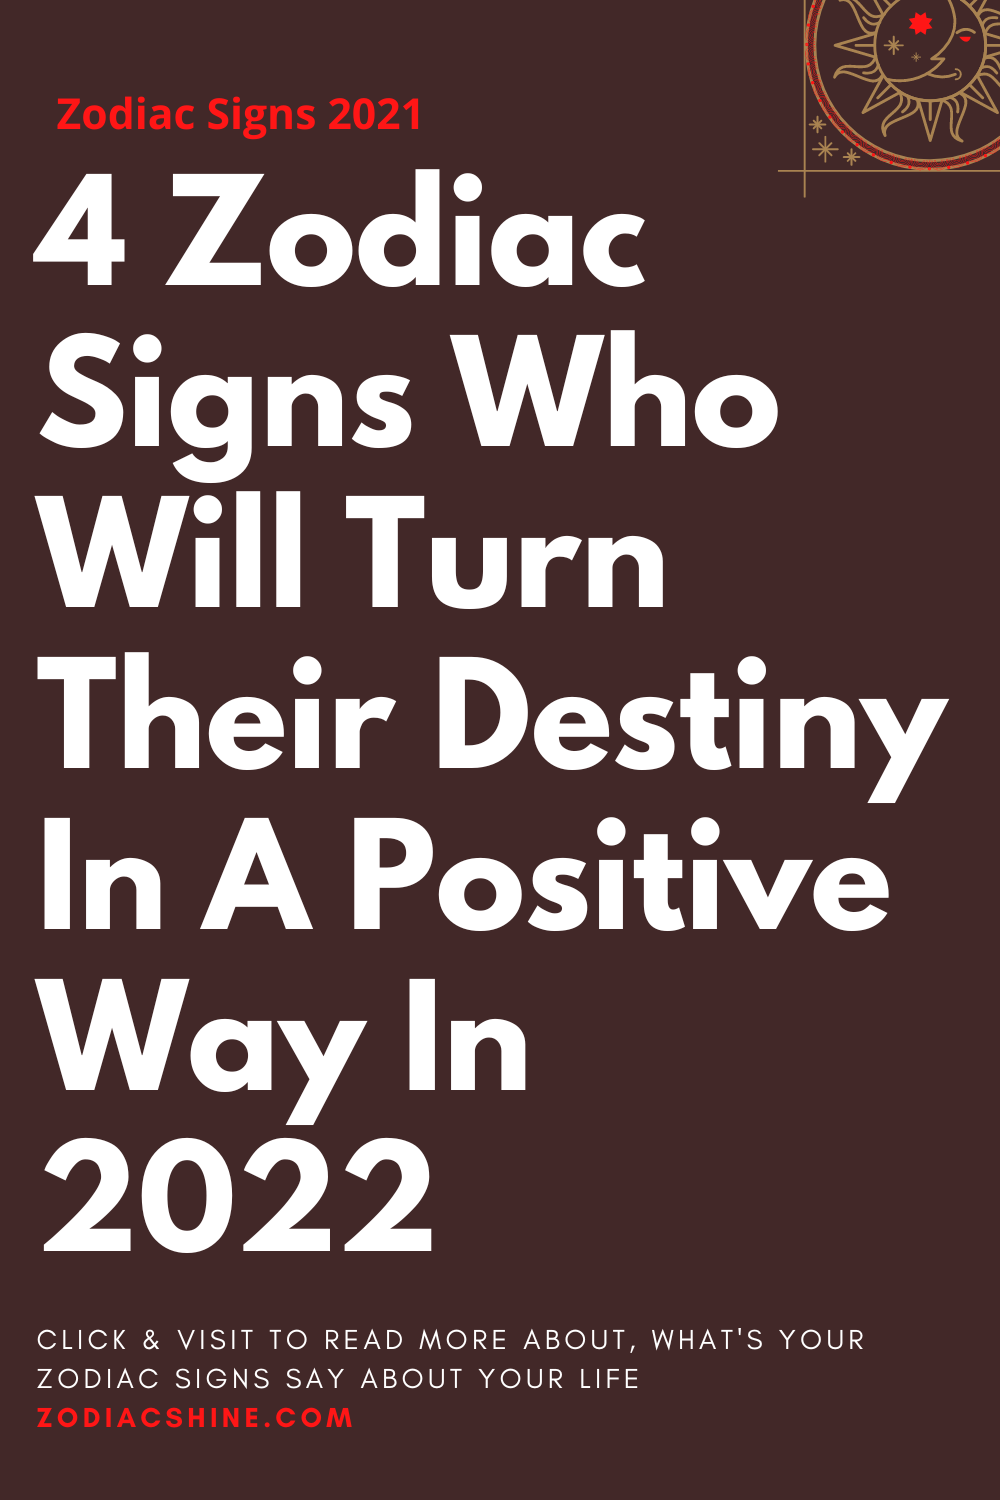 4 Zodiac Signs Who Will Turn Their Destiny In A Positive Way In 2022